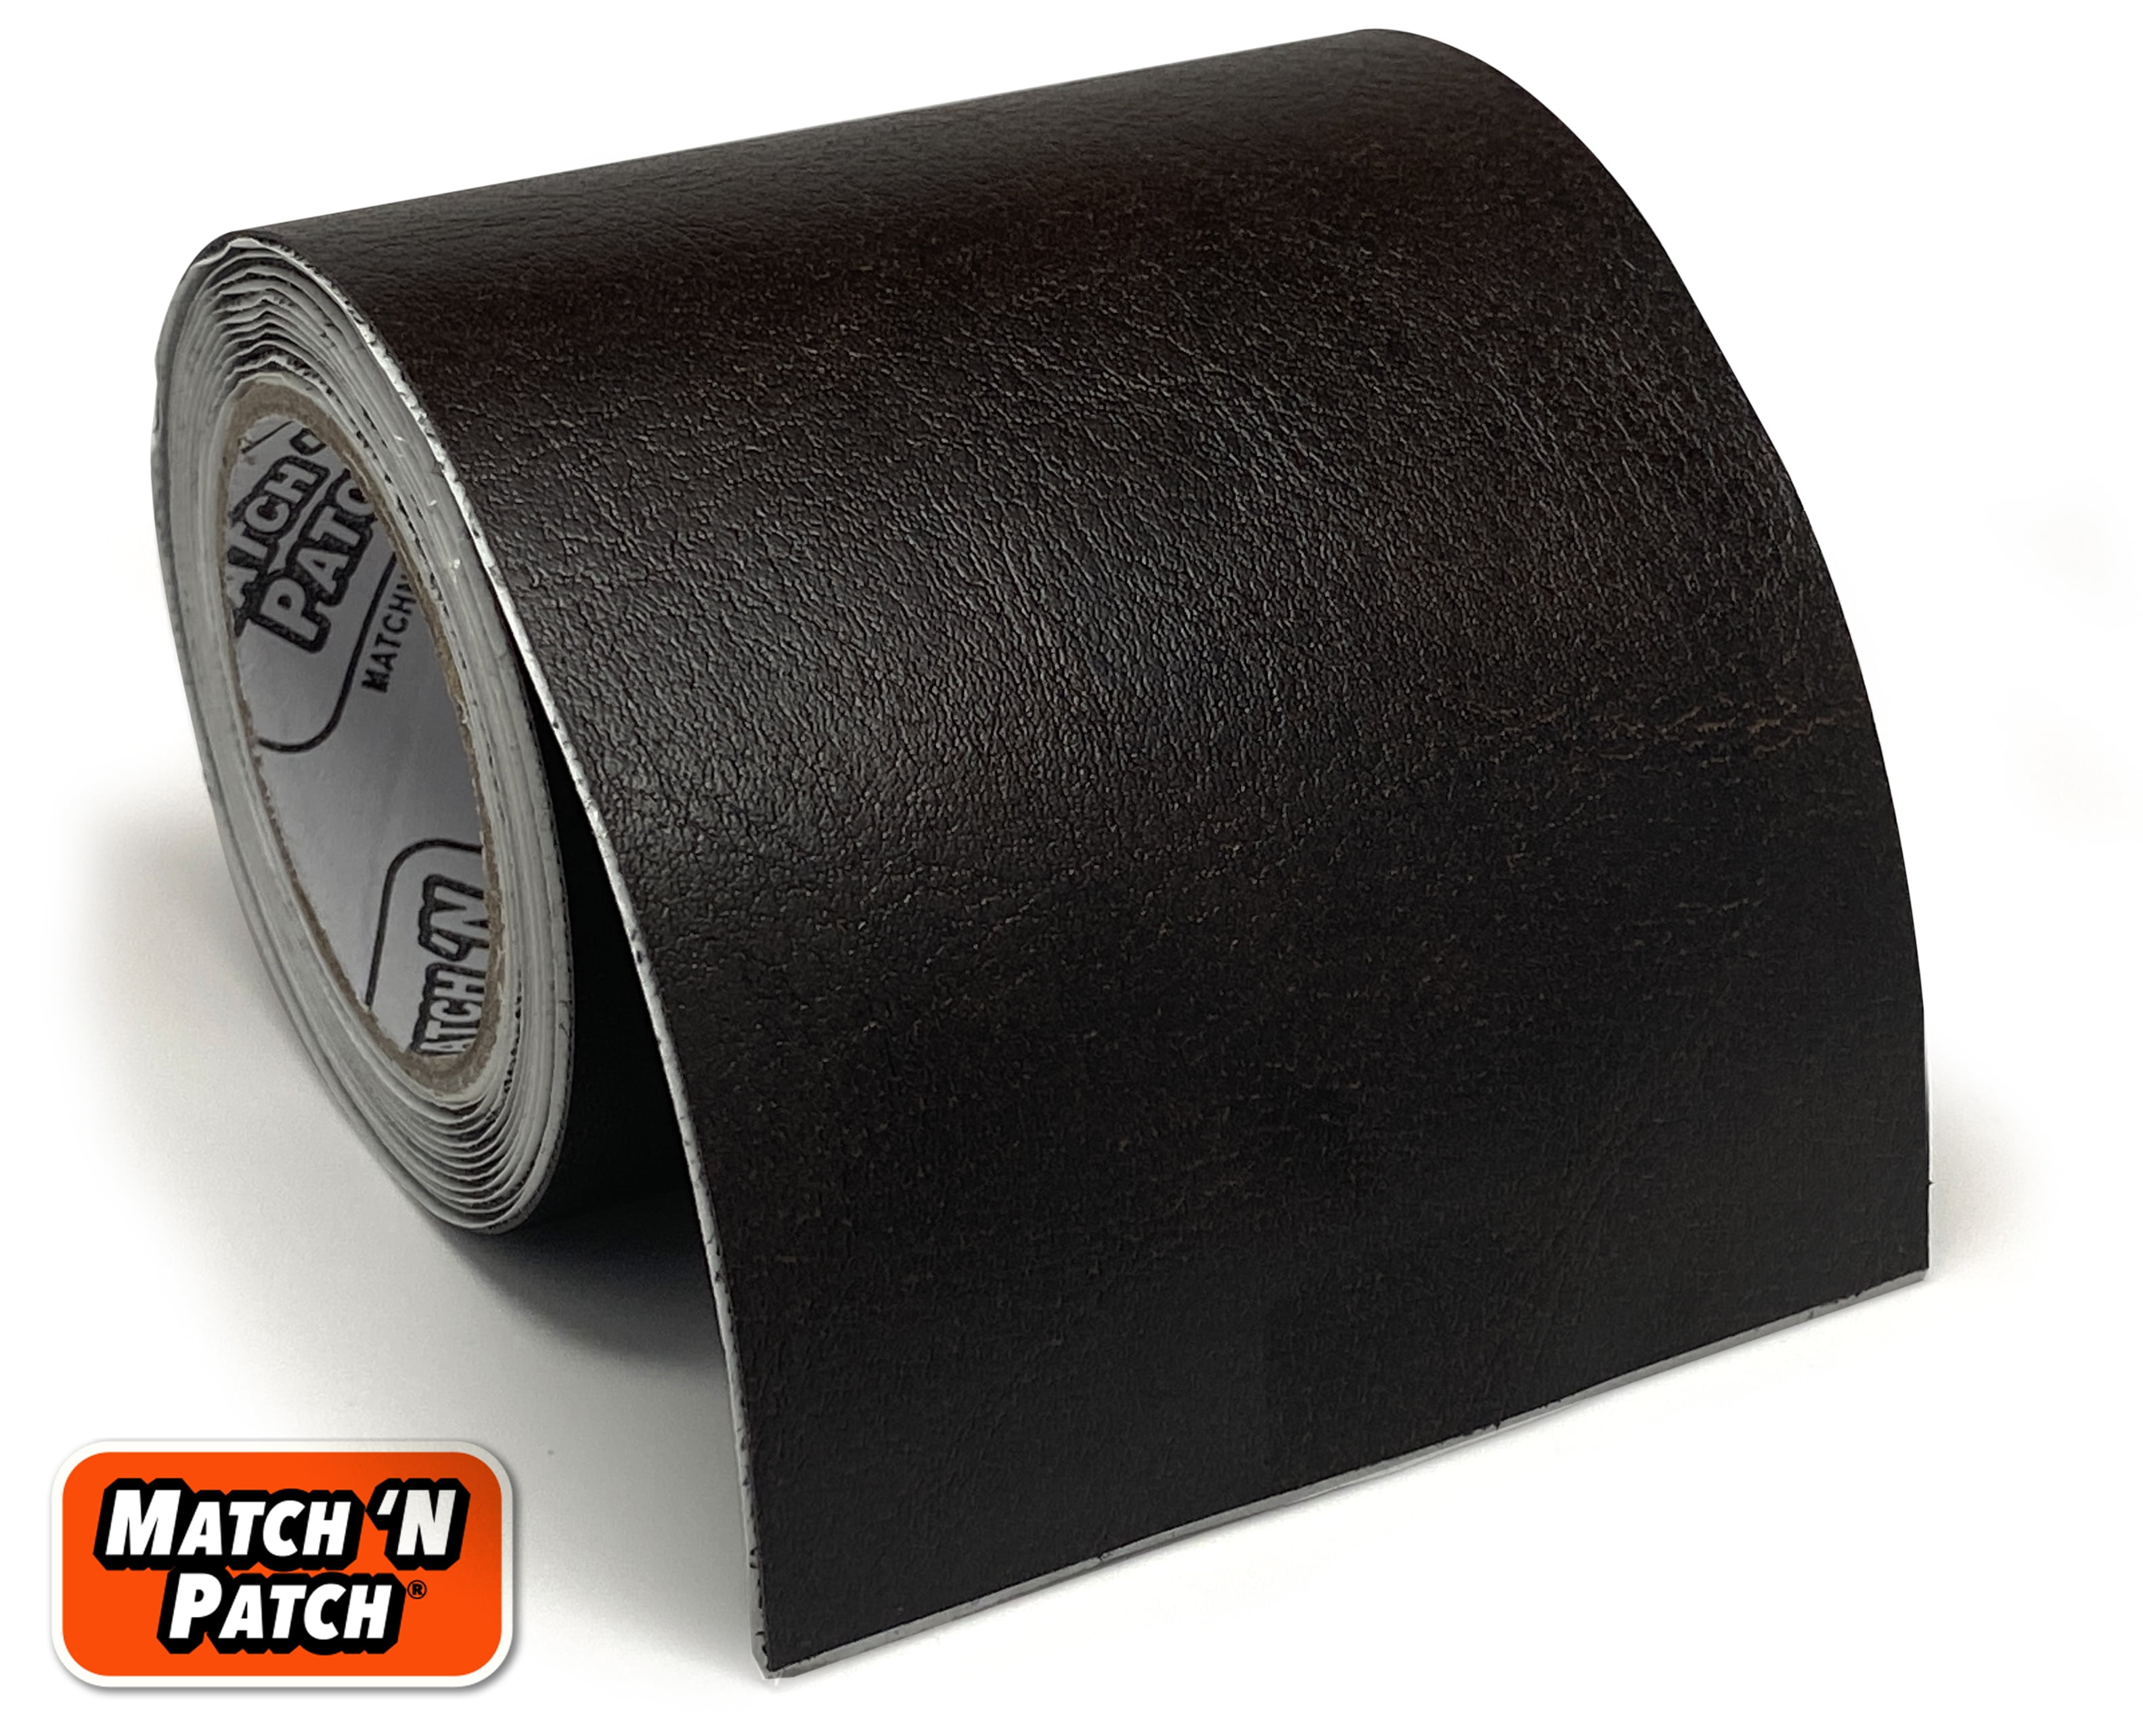 Match N Patch Self-Adhesive Dark Brown Leather Repair Tape, 3 inch X 72 inch